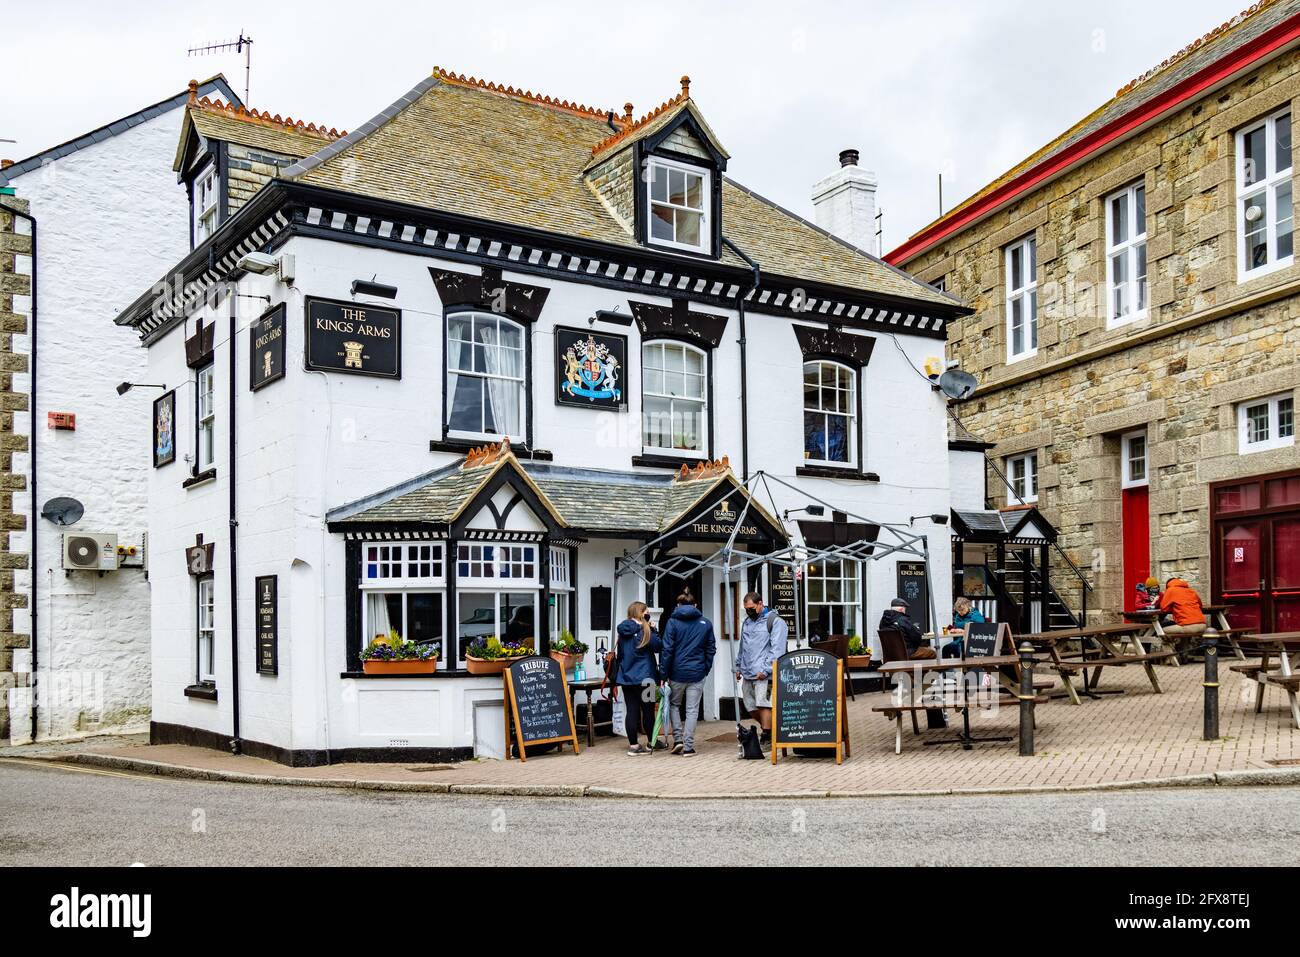 MARAZION, CORNWALL, UK - MAY 11 : View of the Kings Arms public house at Marazion in Cornwall on May 11, 2021. Unidentified people Stock Photo